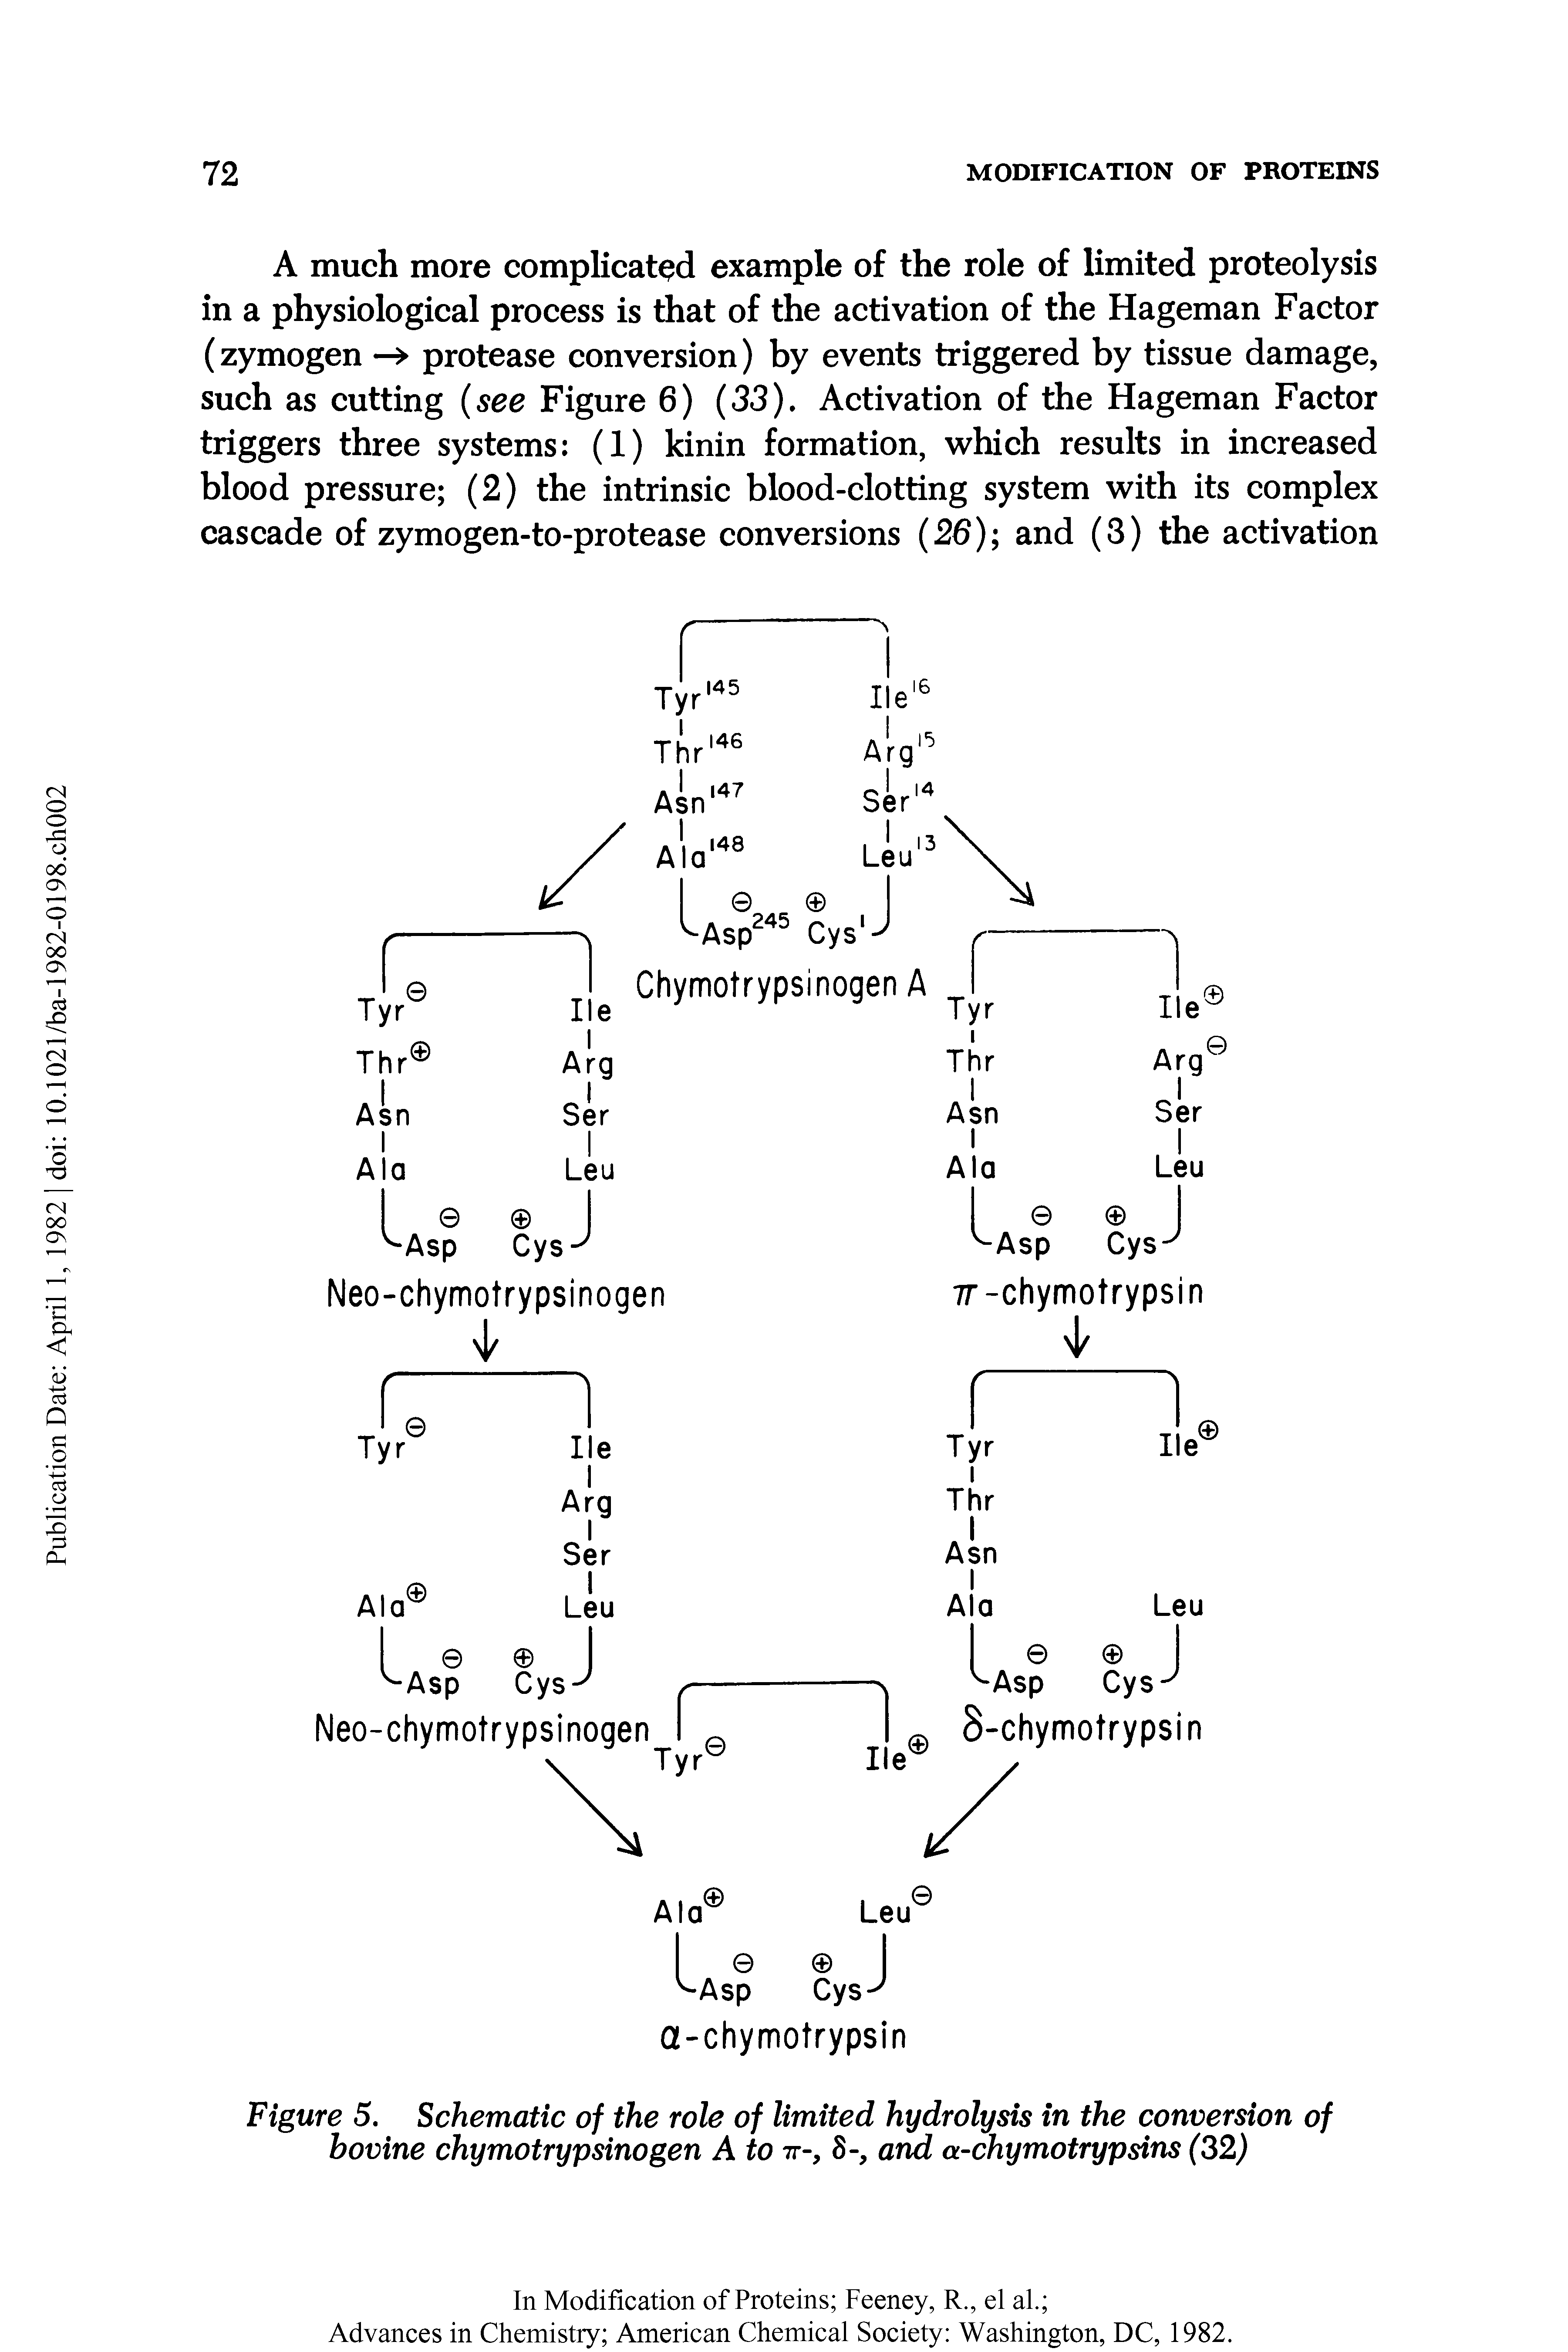 Figure 5. Schematic of the role of limited hydrolysis in the conversion of bovine chymotrypsinogen A to ir-, 8-, and a-chymotrypsins (32)...